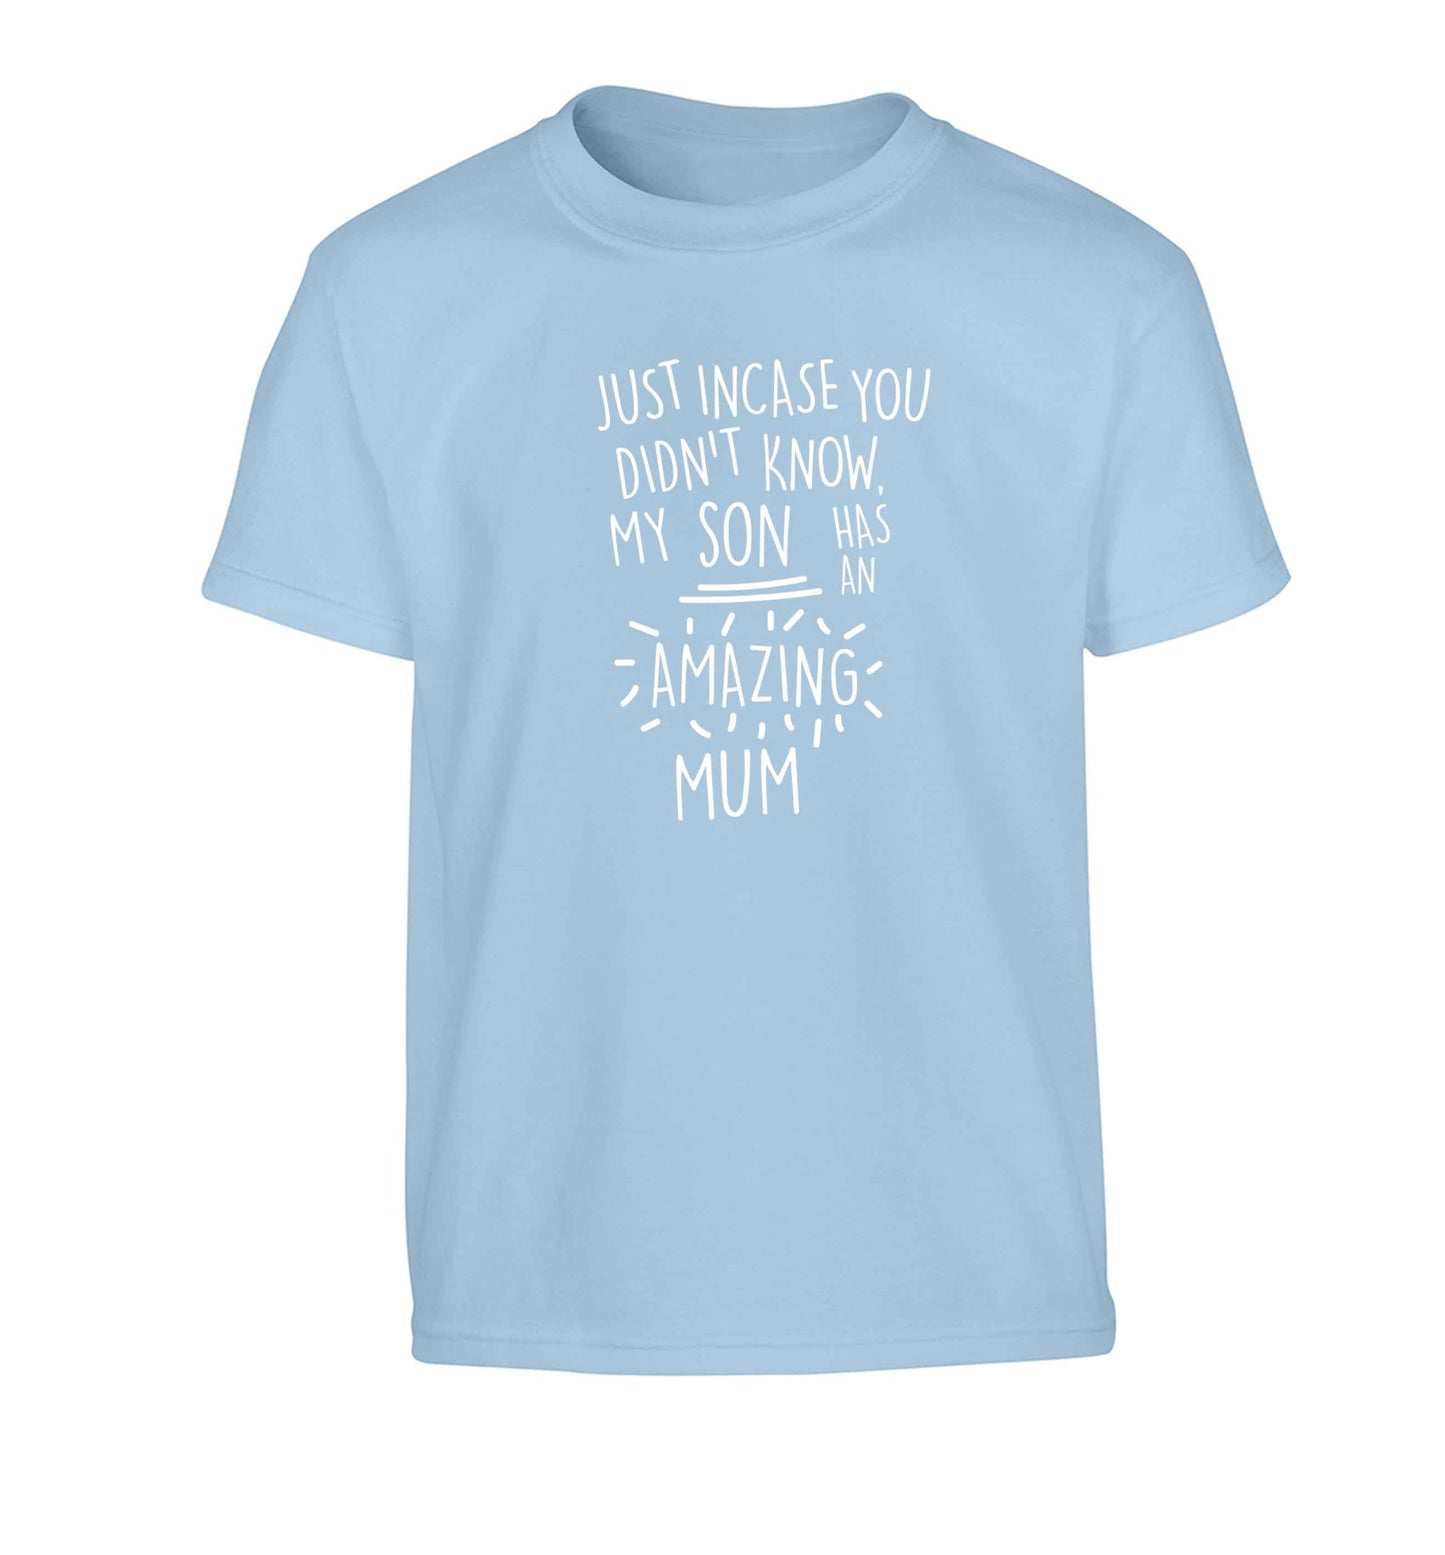 Just incase you didn't know my son has an amazing mum Children's light blue Tshirt 12-13 Years